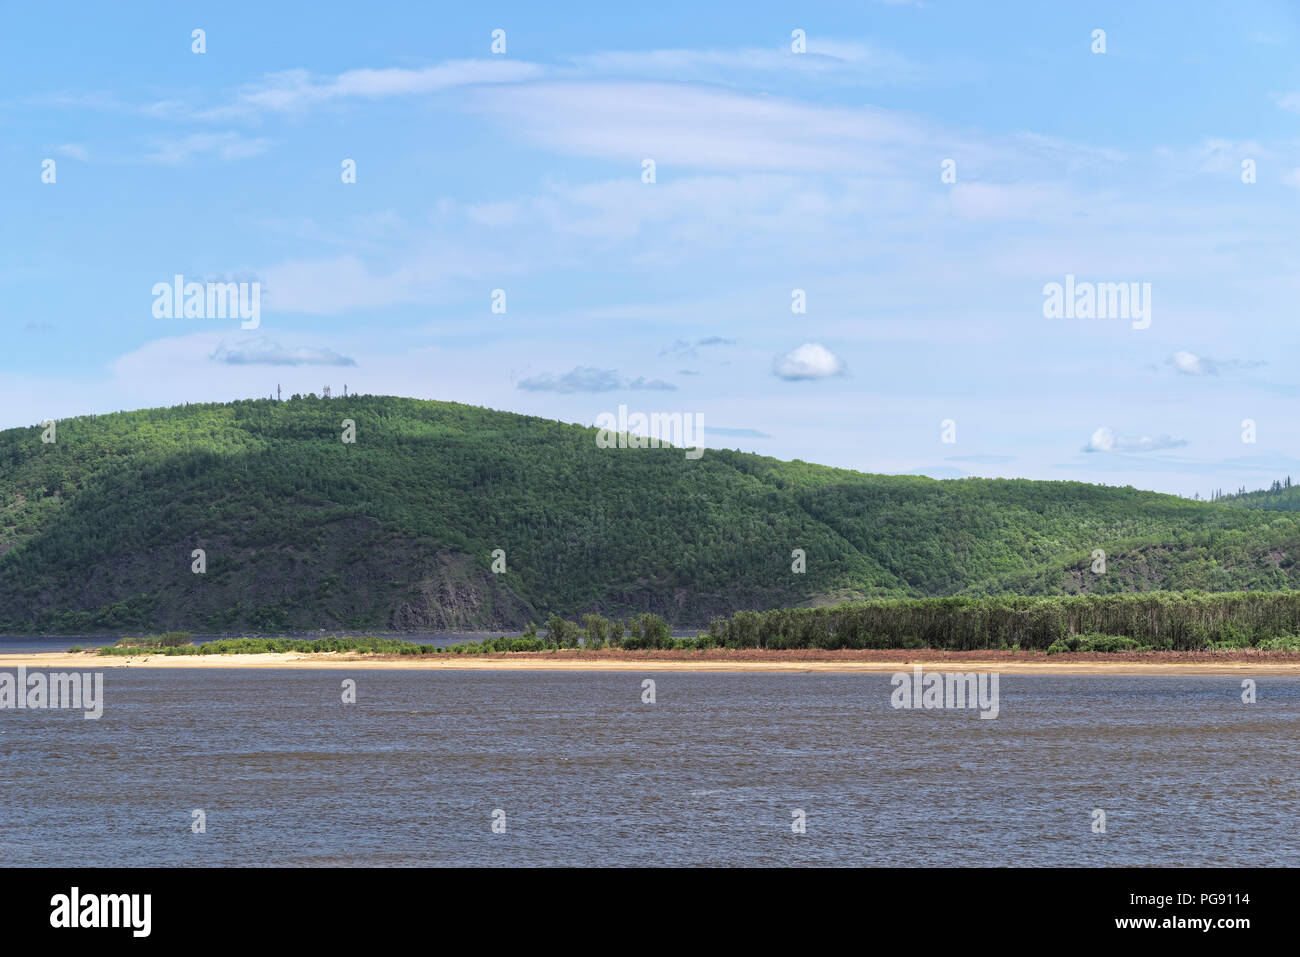 Panoramic view of Amur river and forested hills in the opposite shore, Komsomolsk-on-Amur, Russia Stock Photo